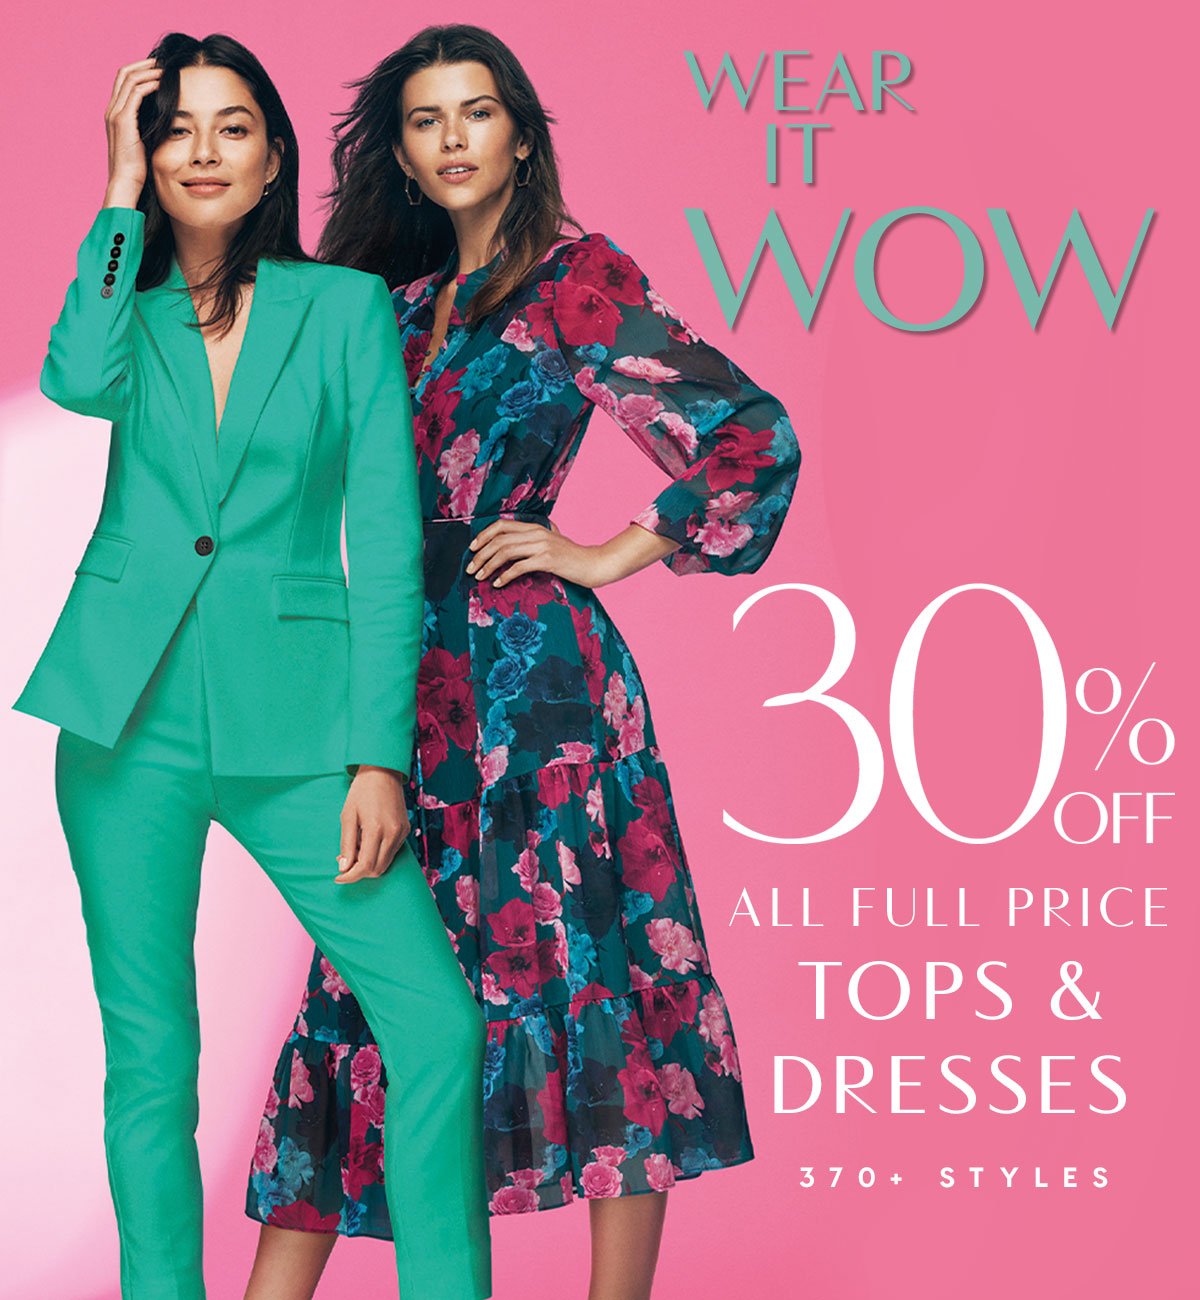 Wear it Wow. 30% Off All Full Price Tops & Dresses. 370+ Styles.